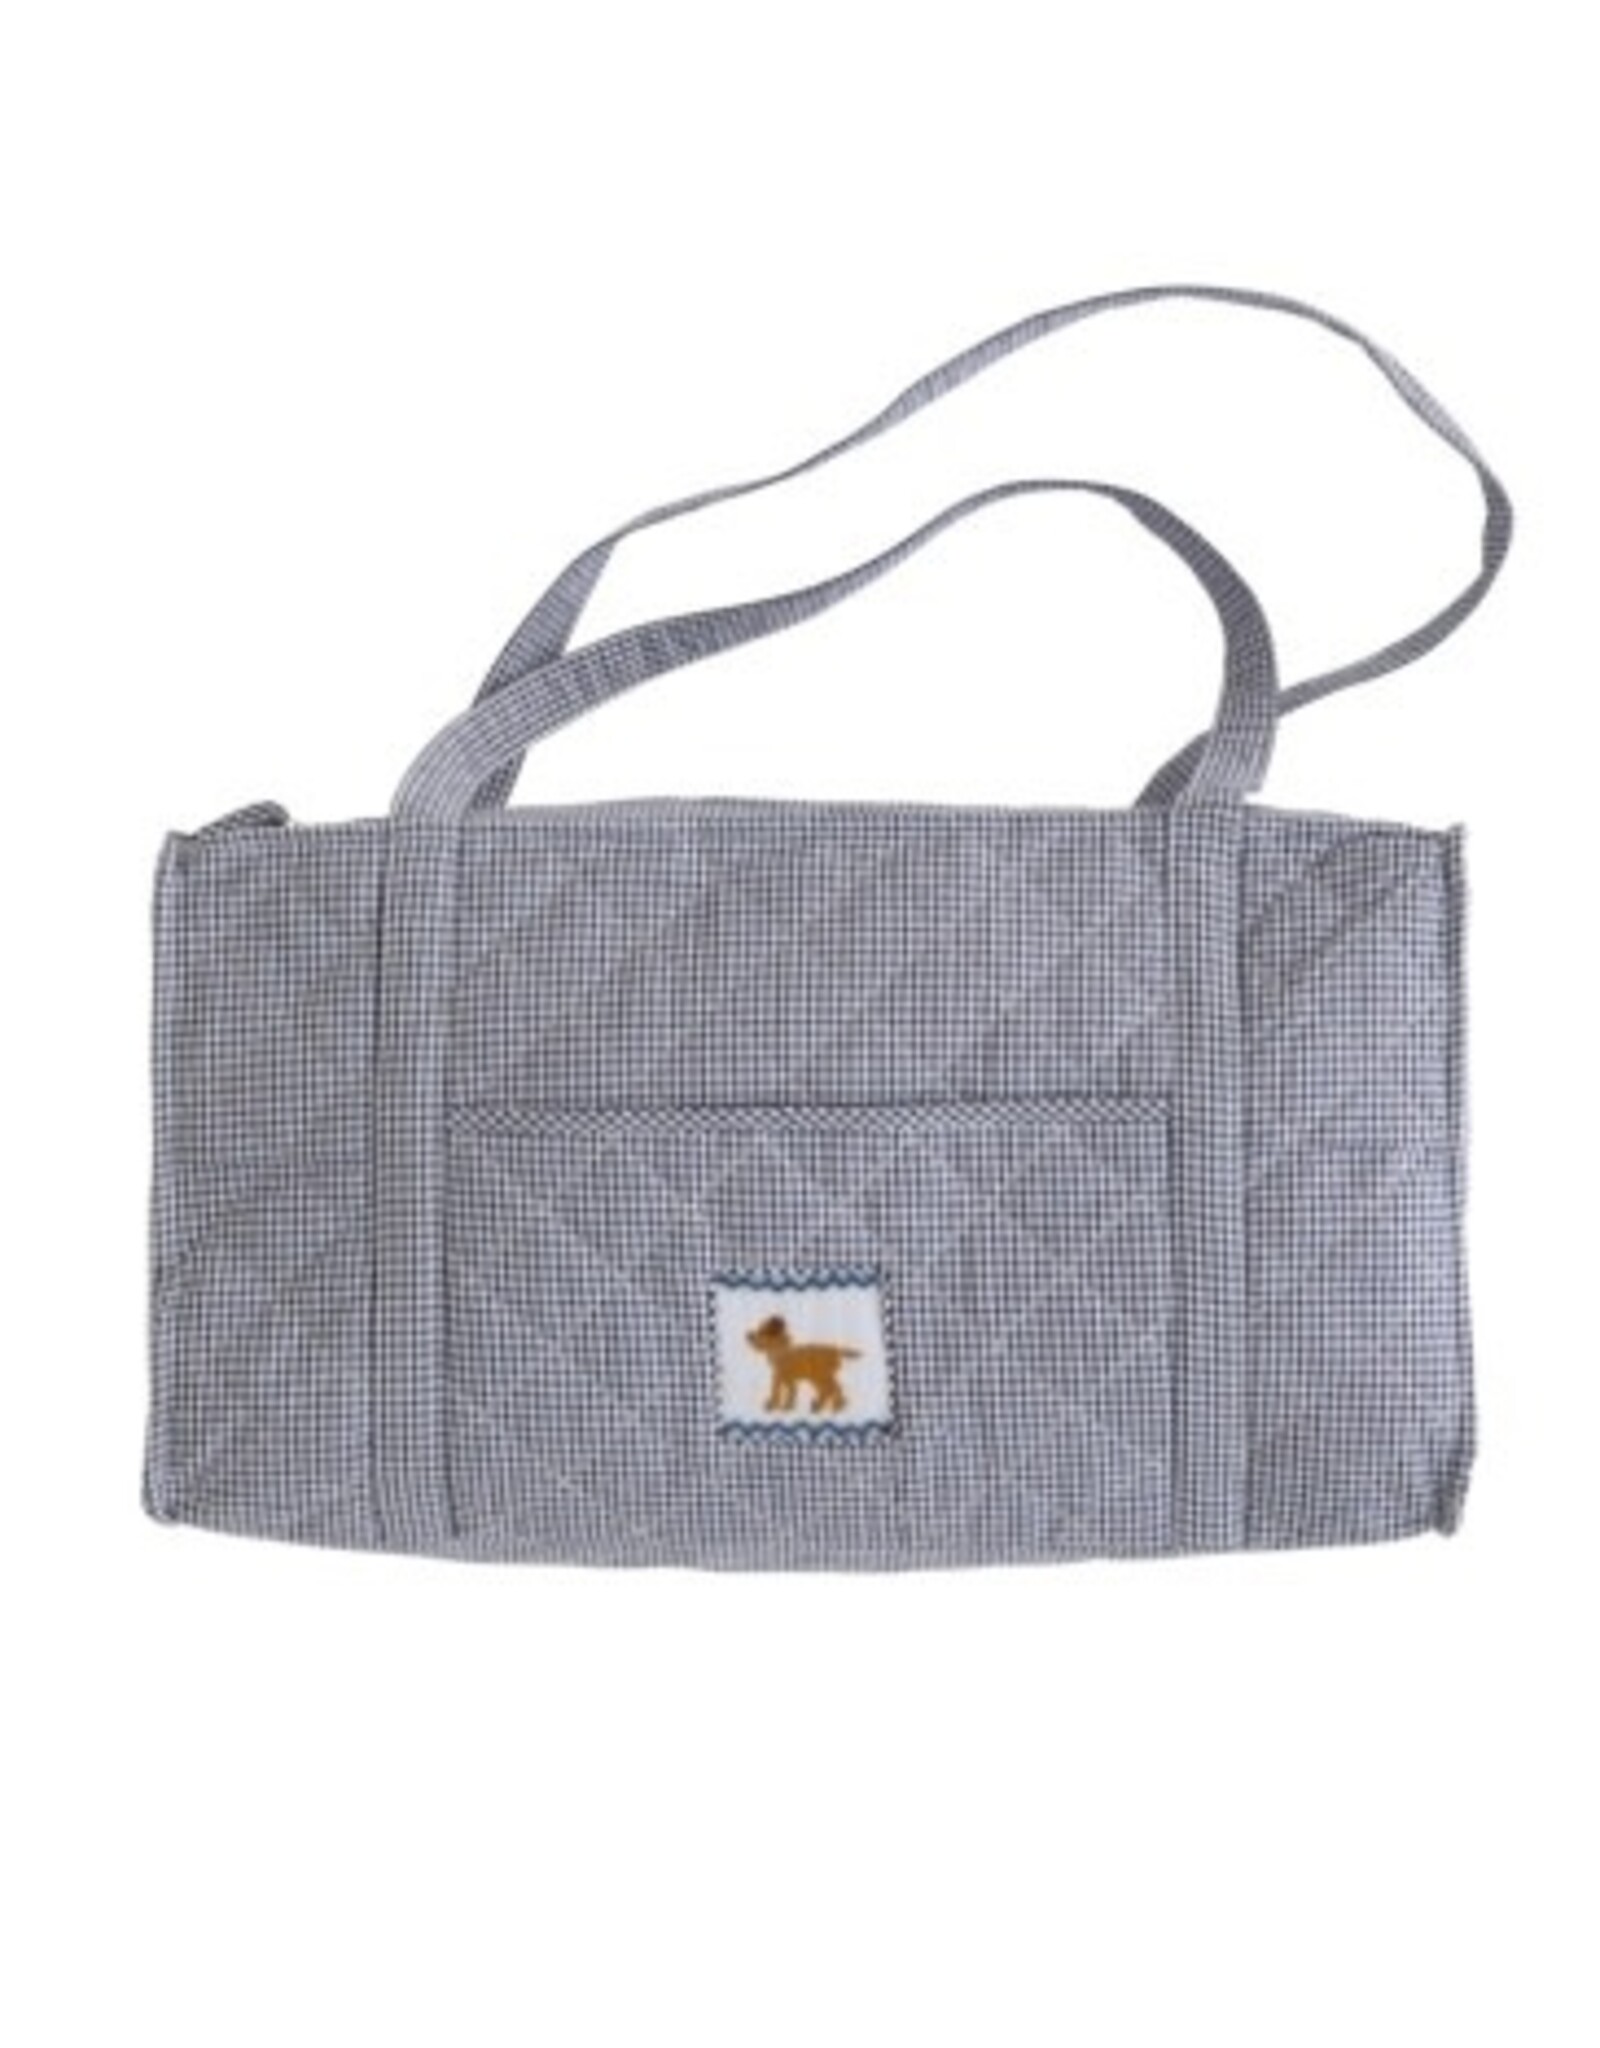 Little English Quilted Luggage - Navy Dog